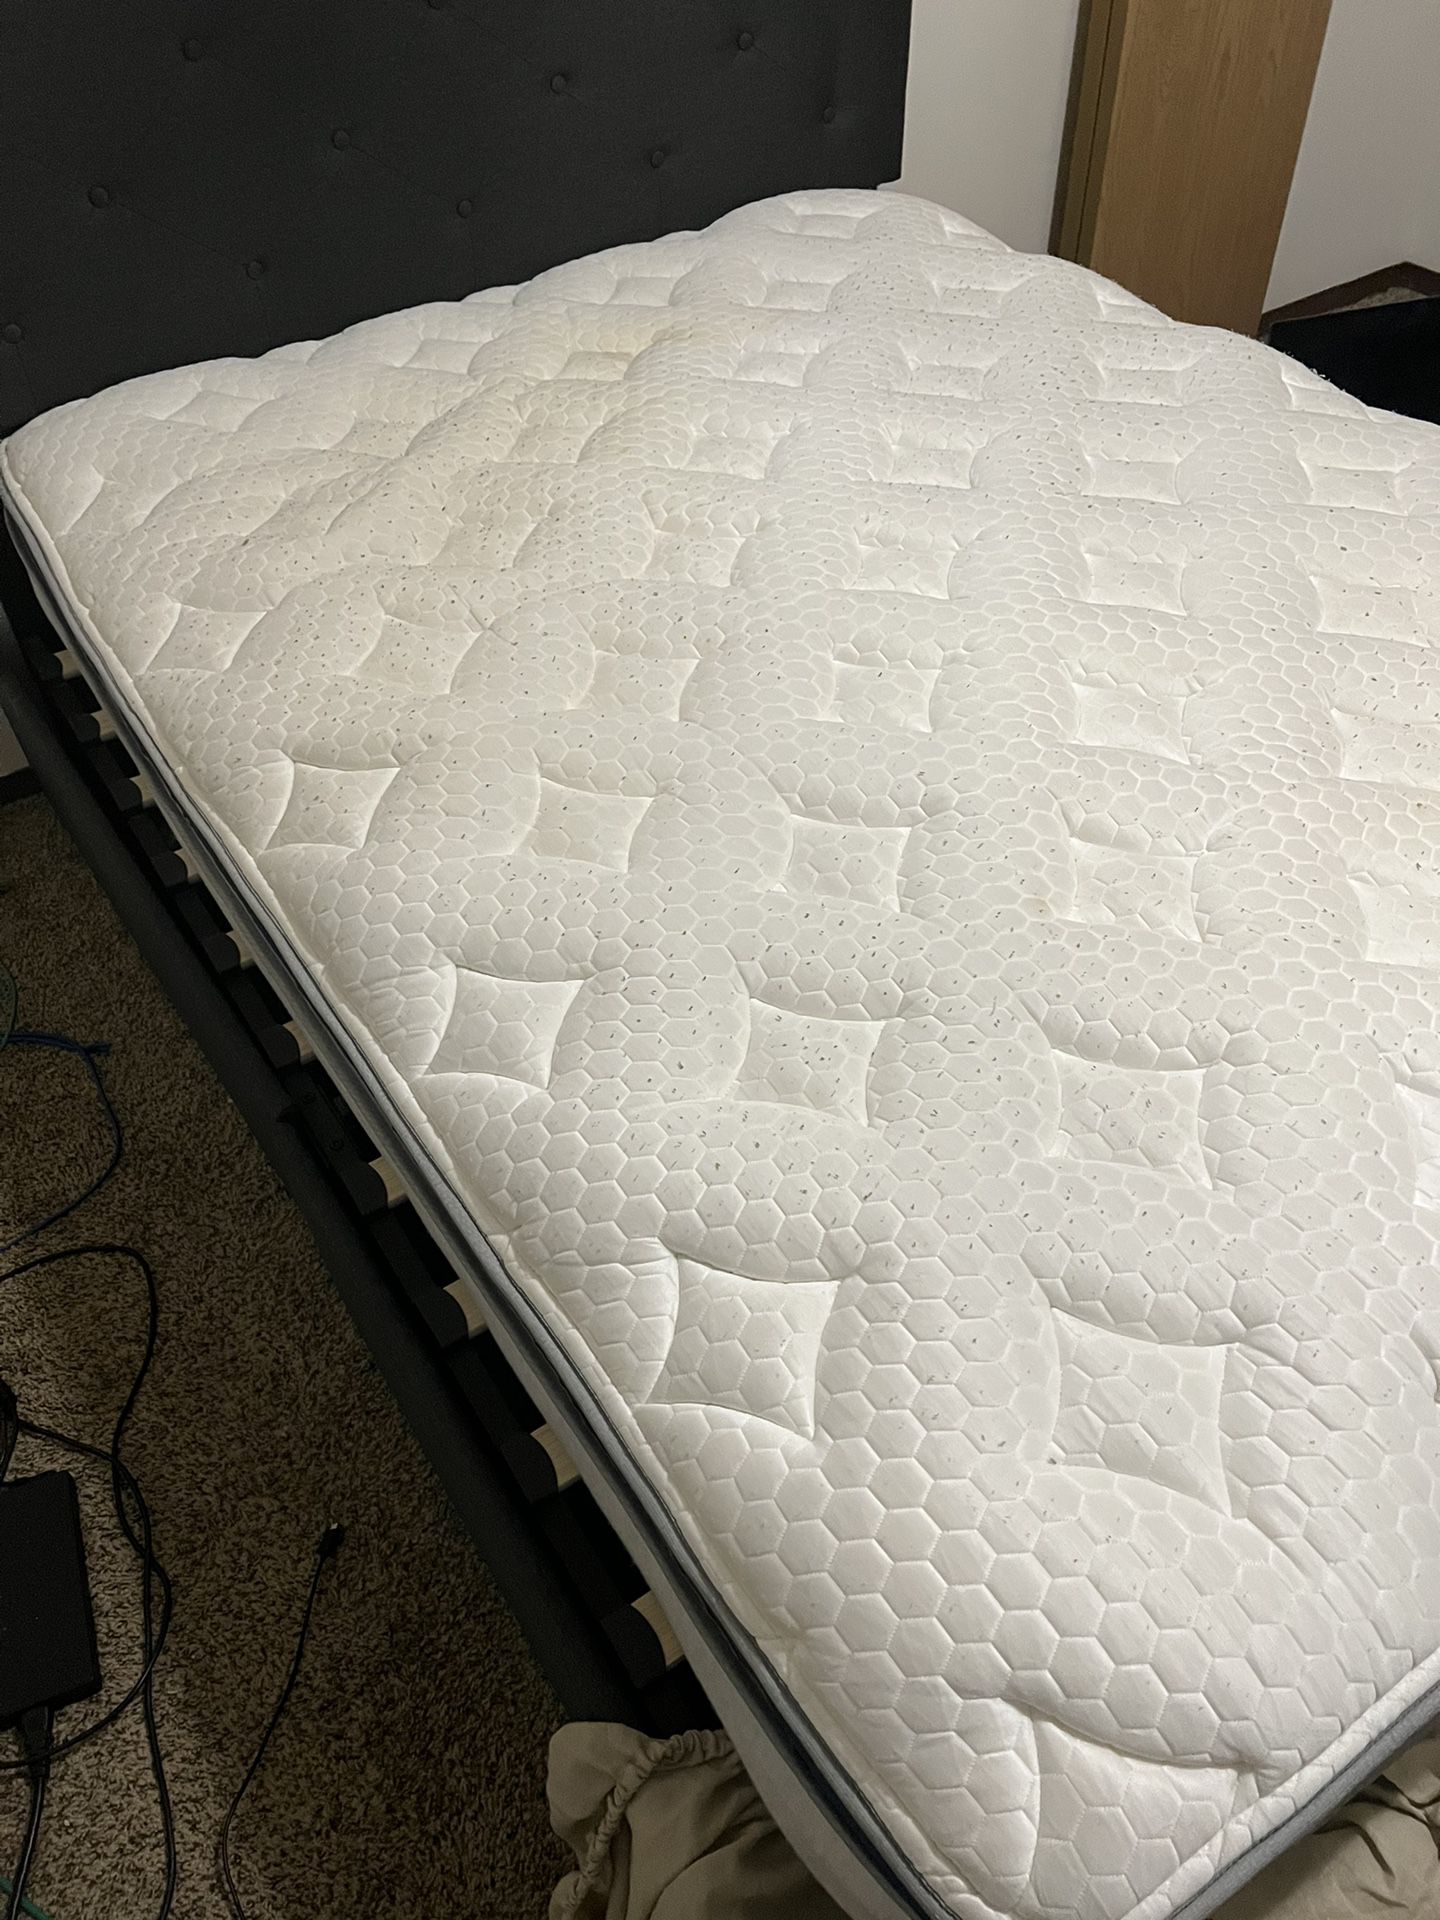 Full size Helix midnight mattress with glaciotex pillow top